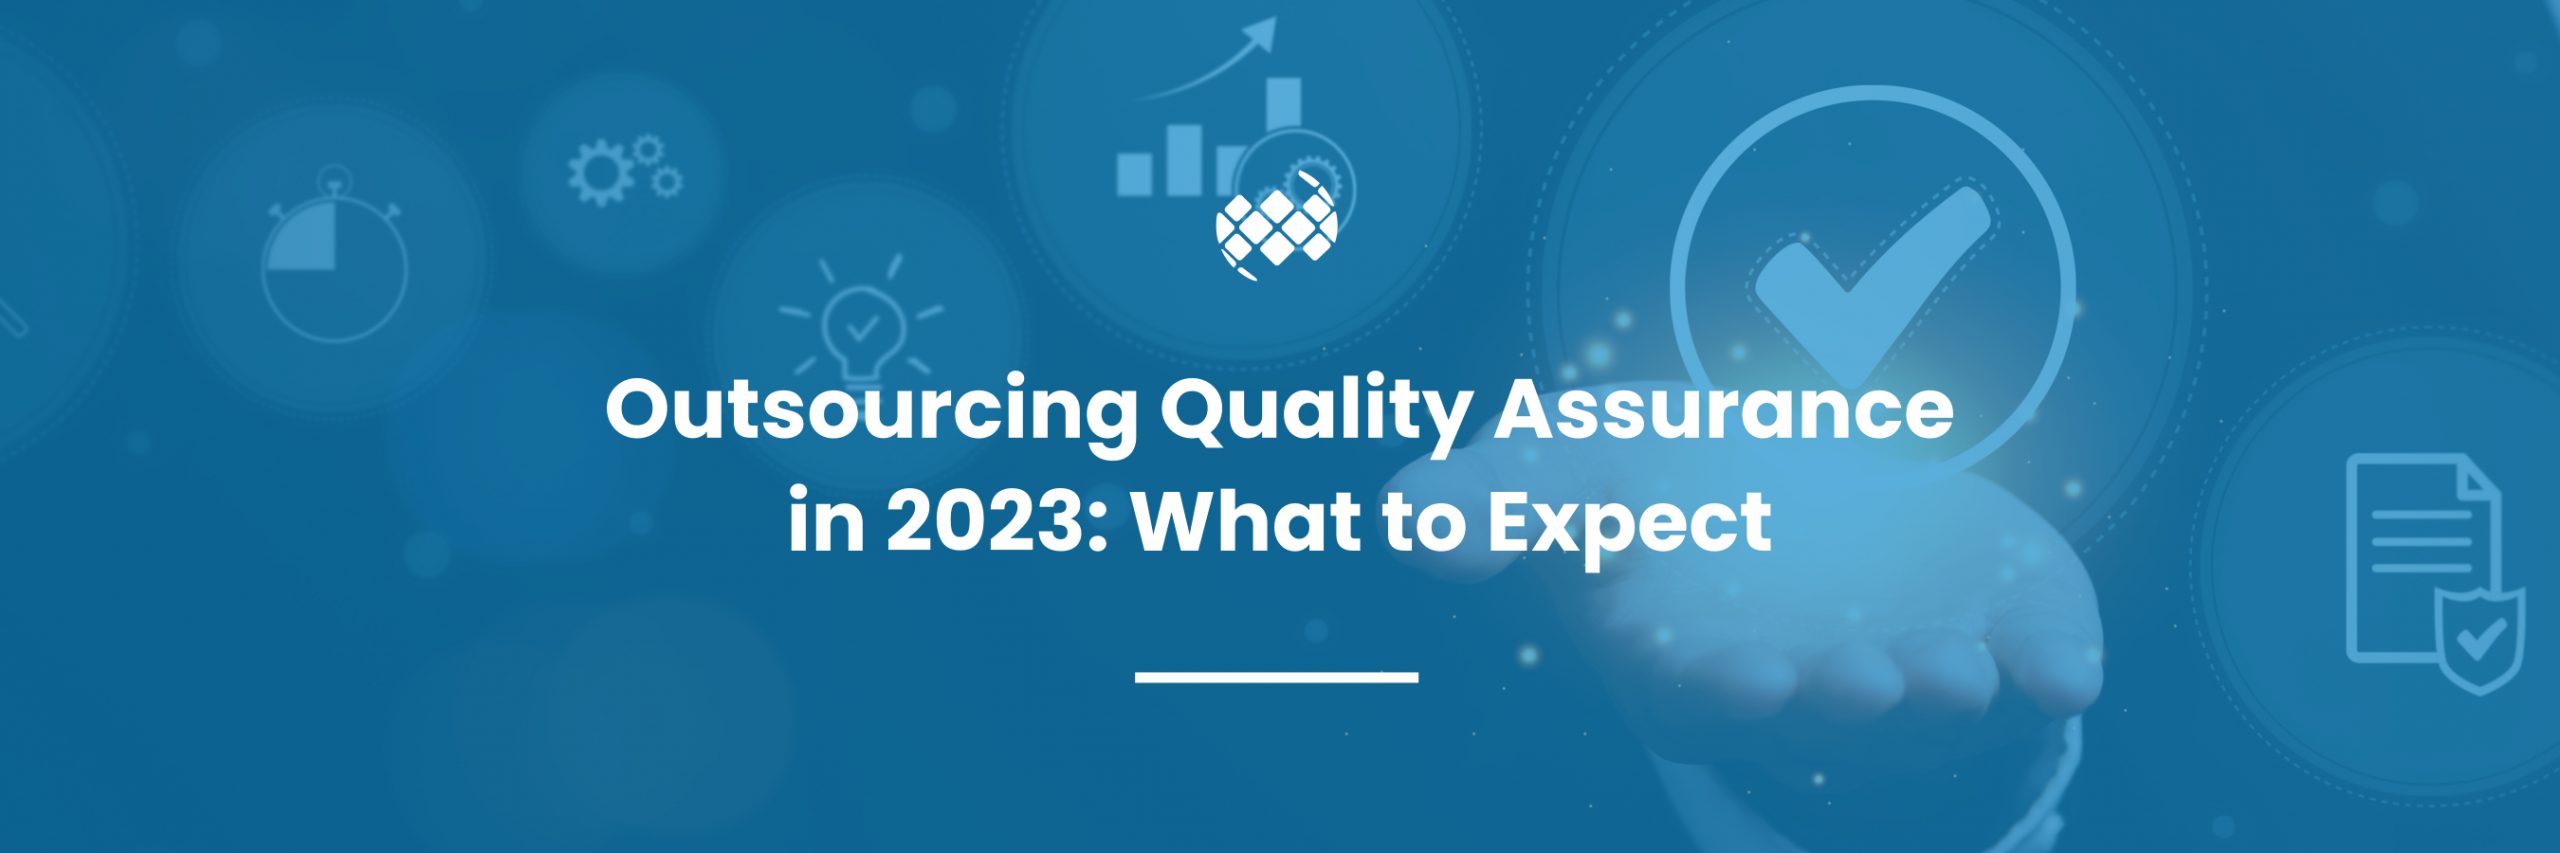 Outsourcing Quality Assurance